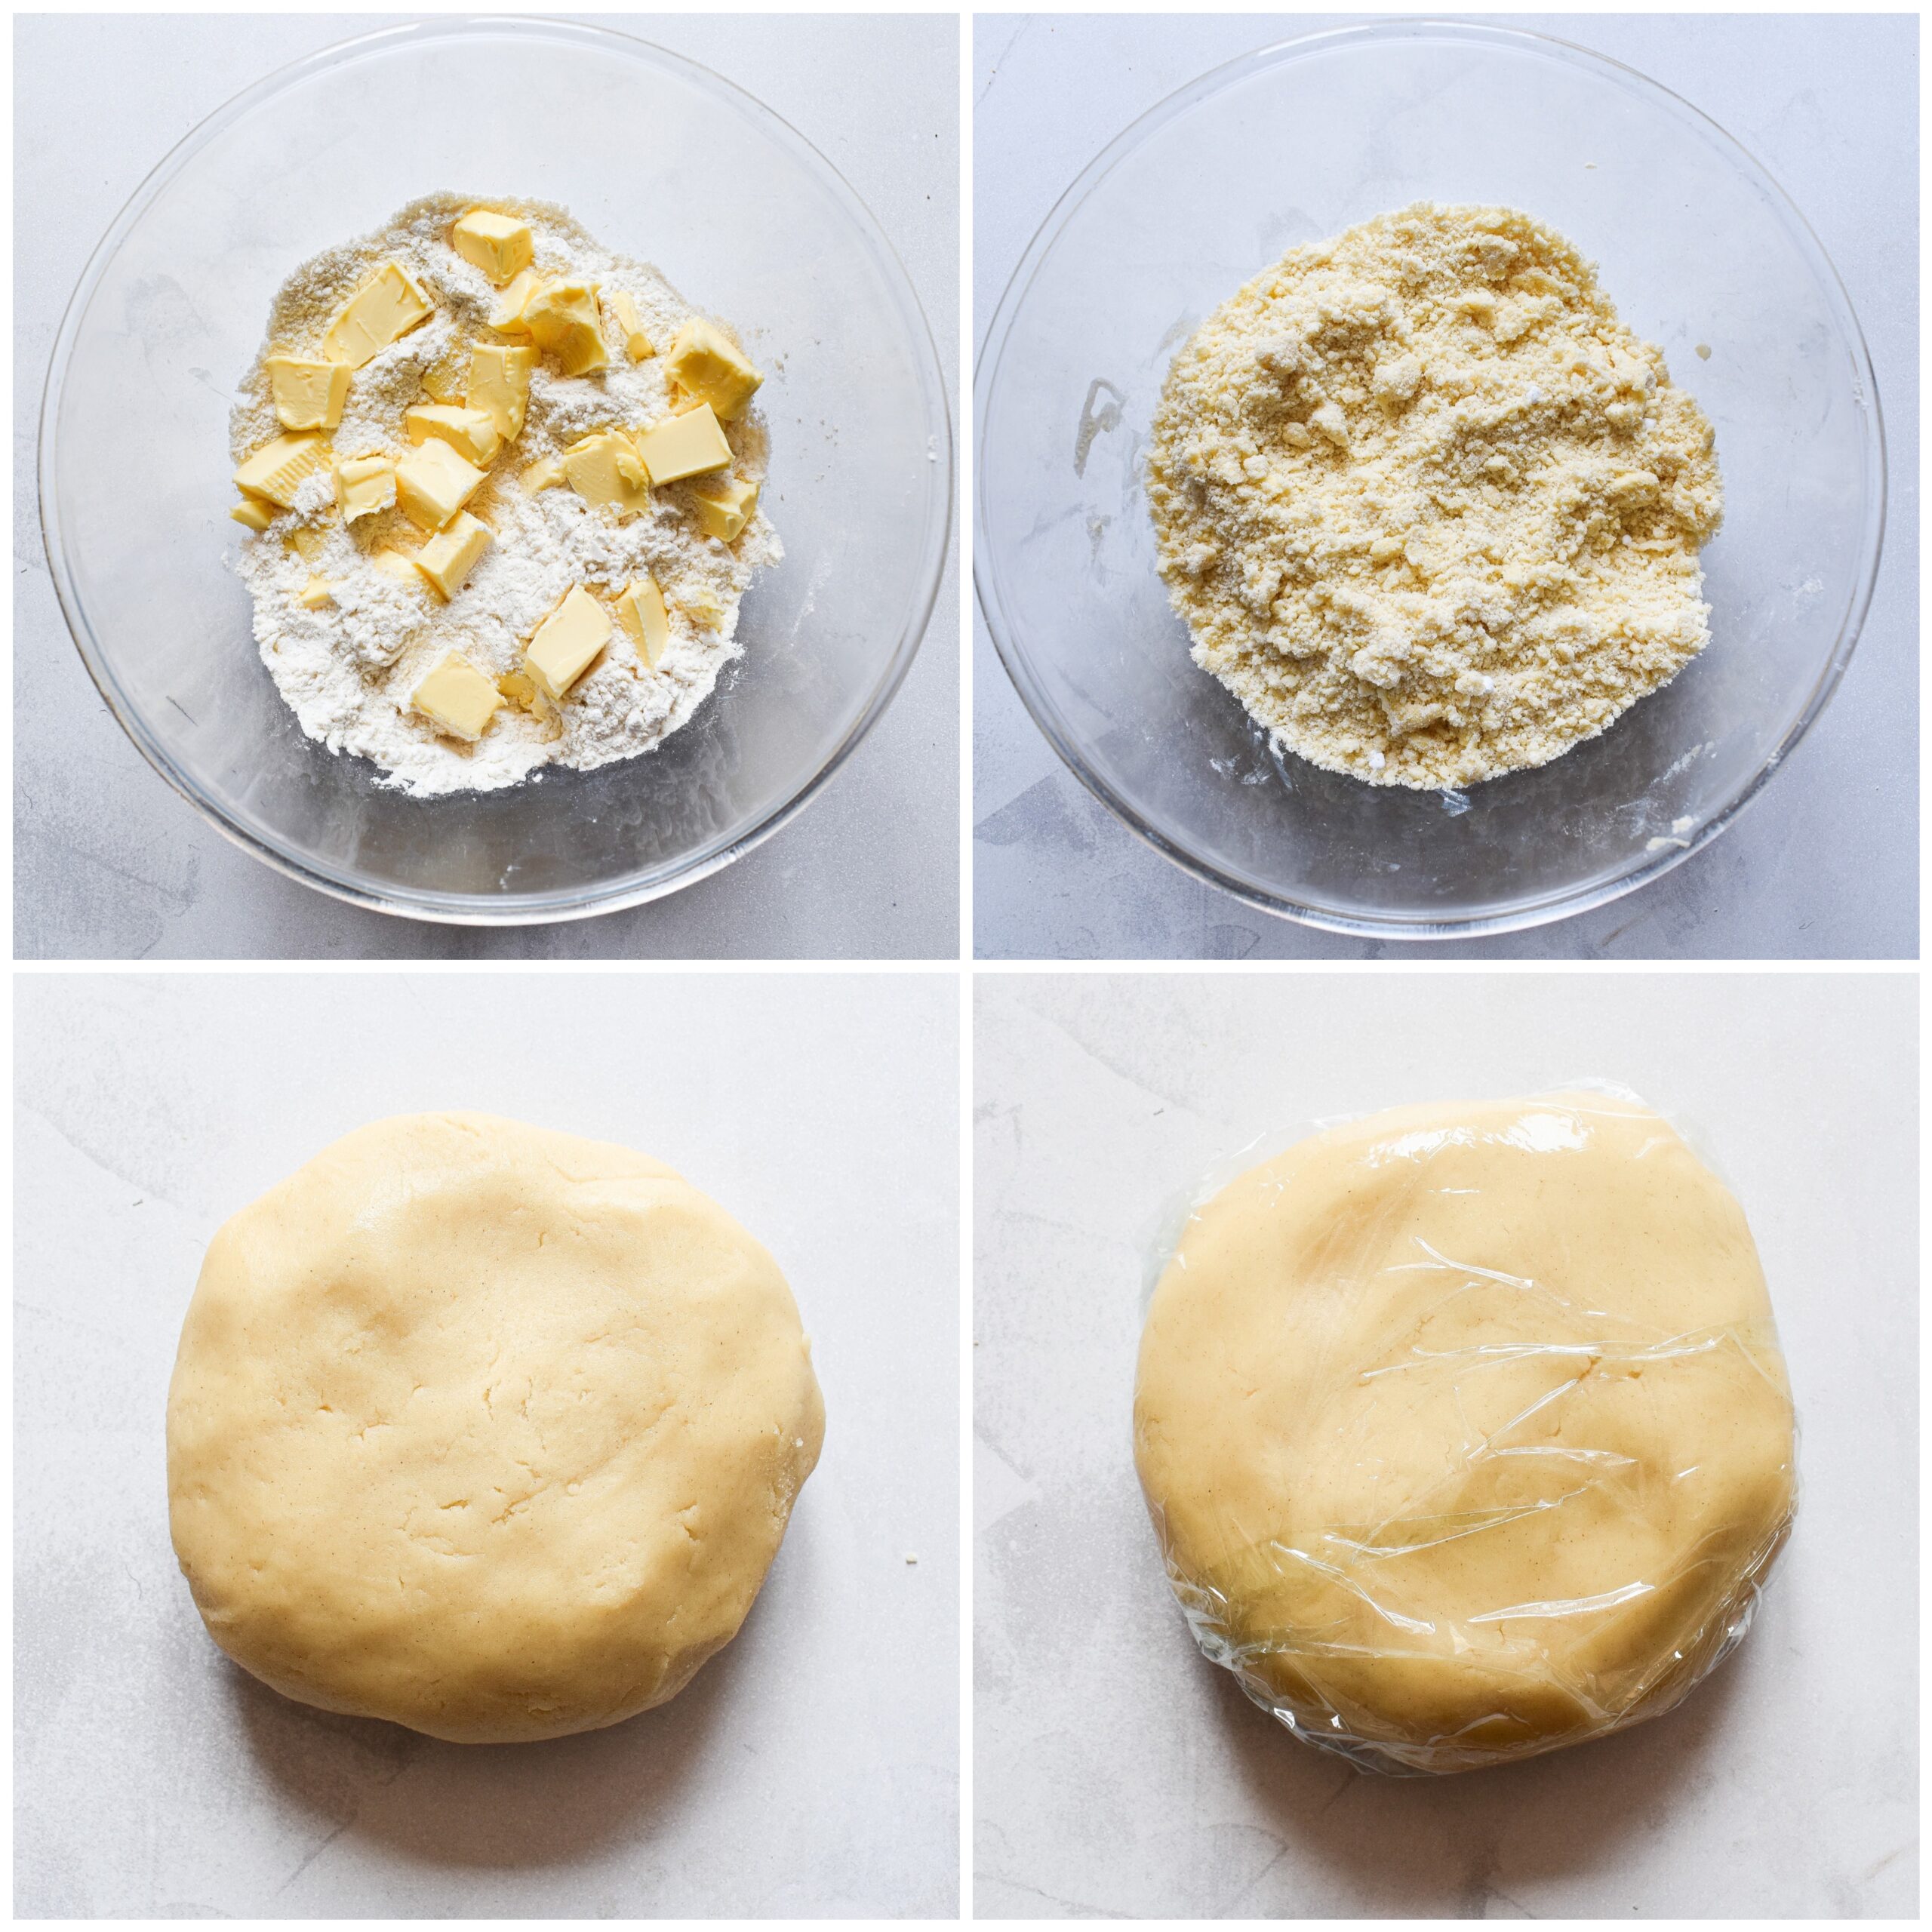 How to Make Sweet Shortcrust Pastry?